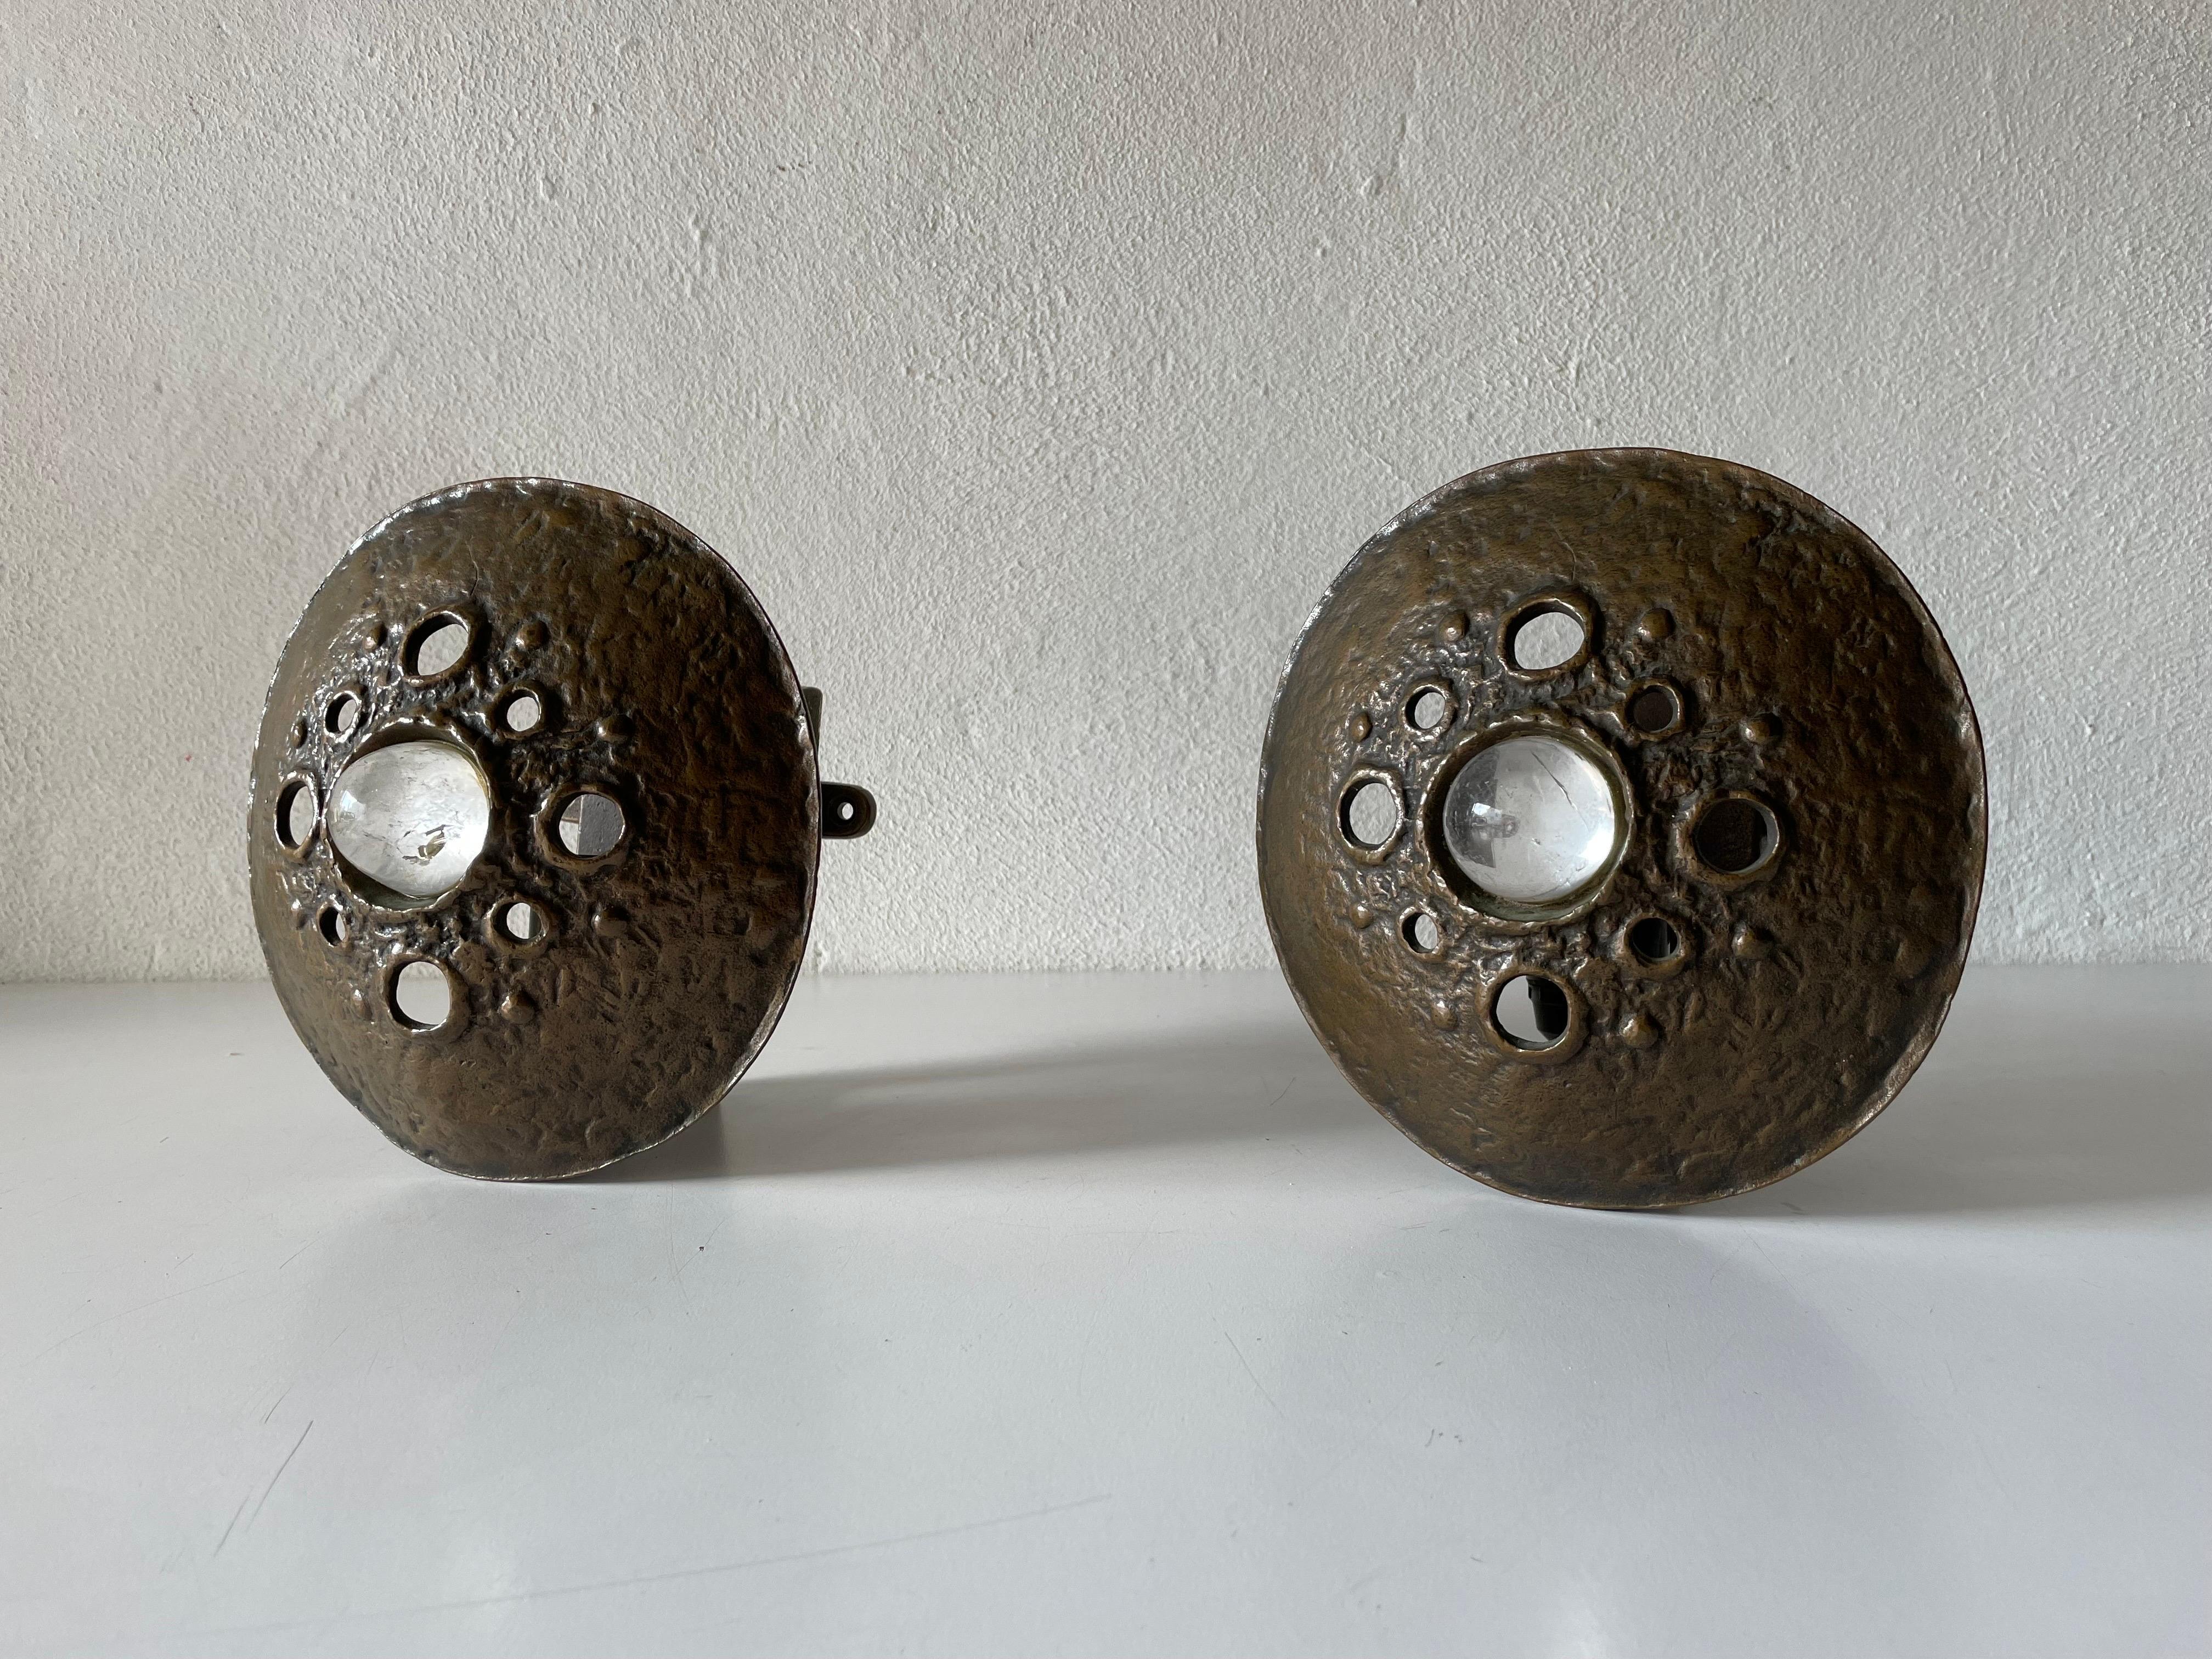 Wonderful Brutalist Bronze Sconces, 1960s Germany

Very elegant and Minimalist wall lamps
Lamp is in very good condition.

These lamps works with E27 standard light bulbs. 
Wired and suitable to use in all countries. (110-220